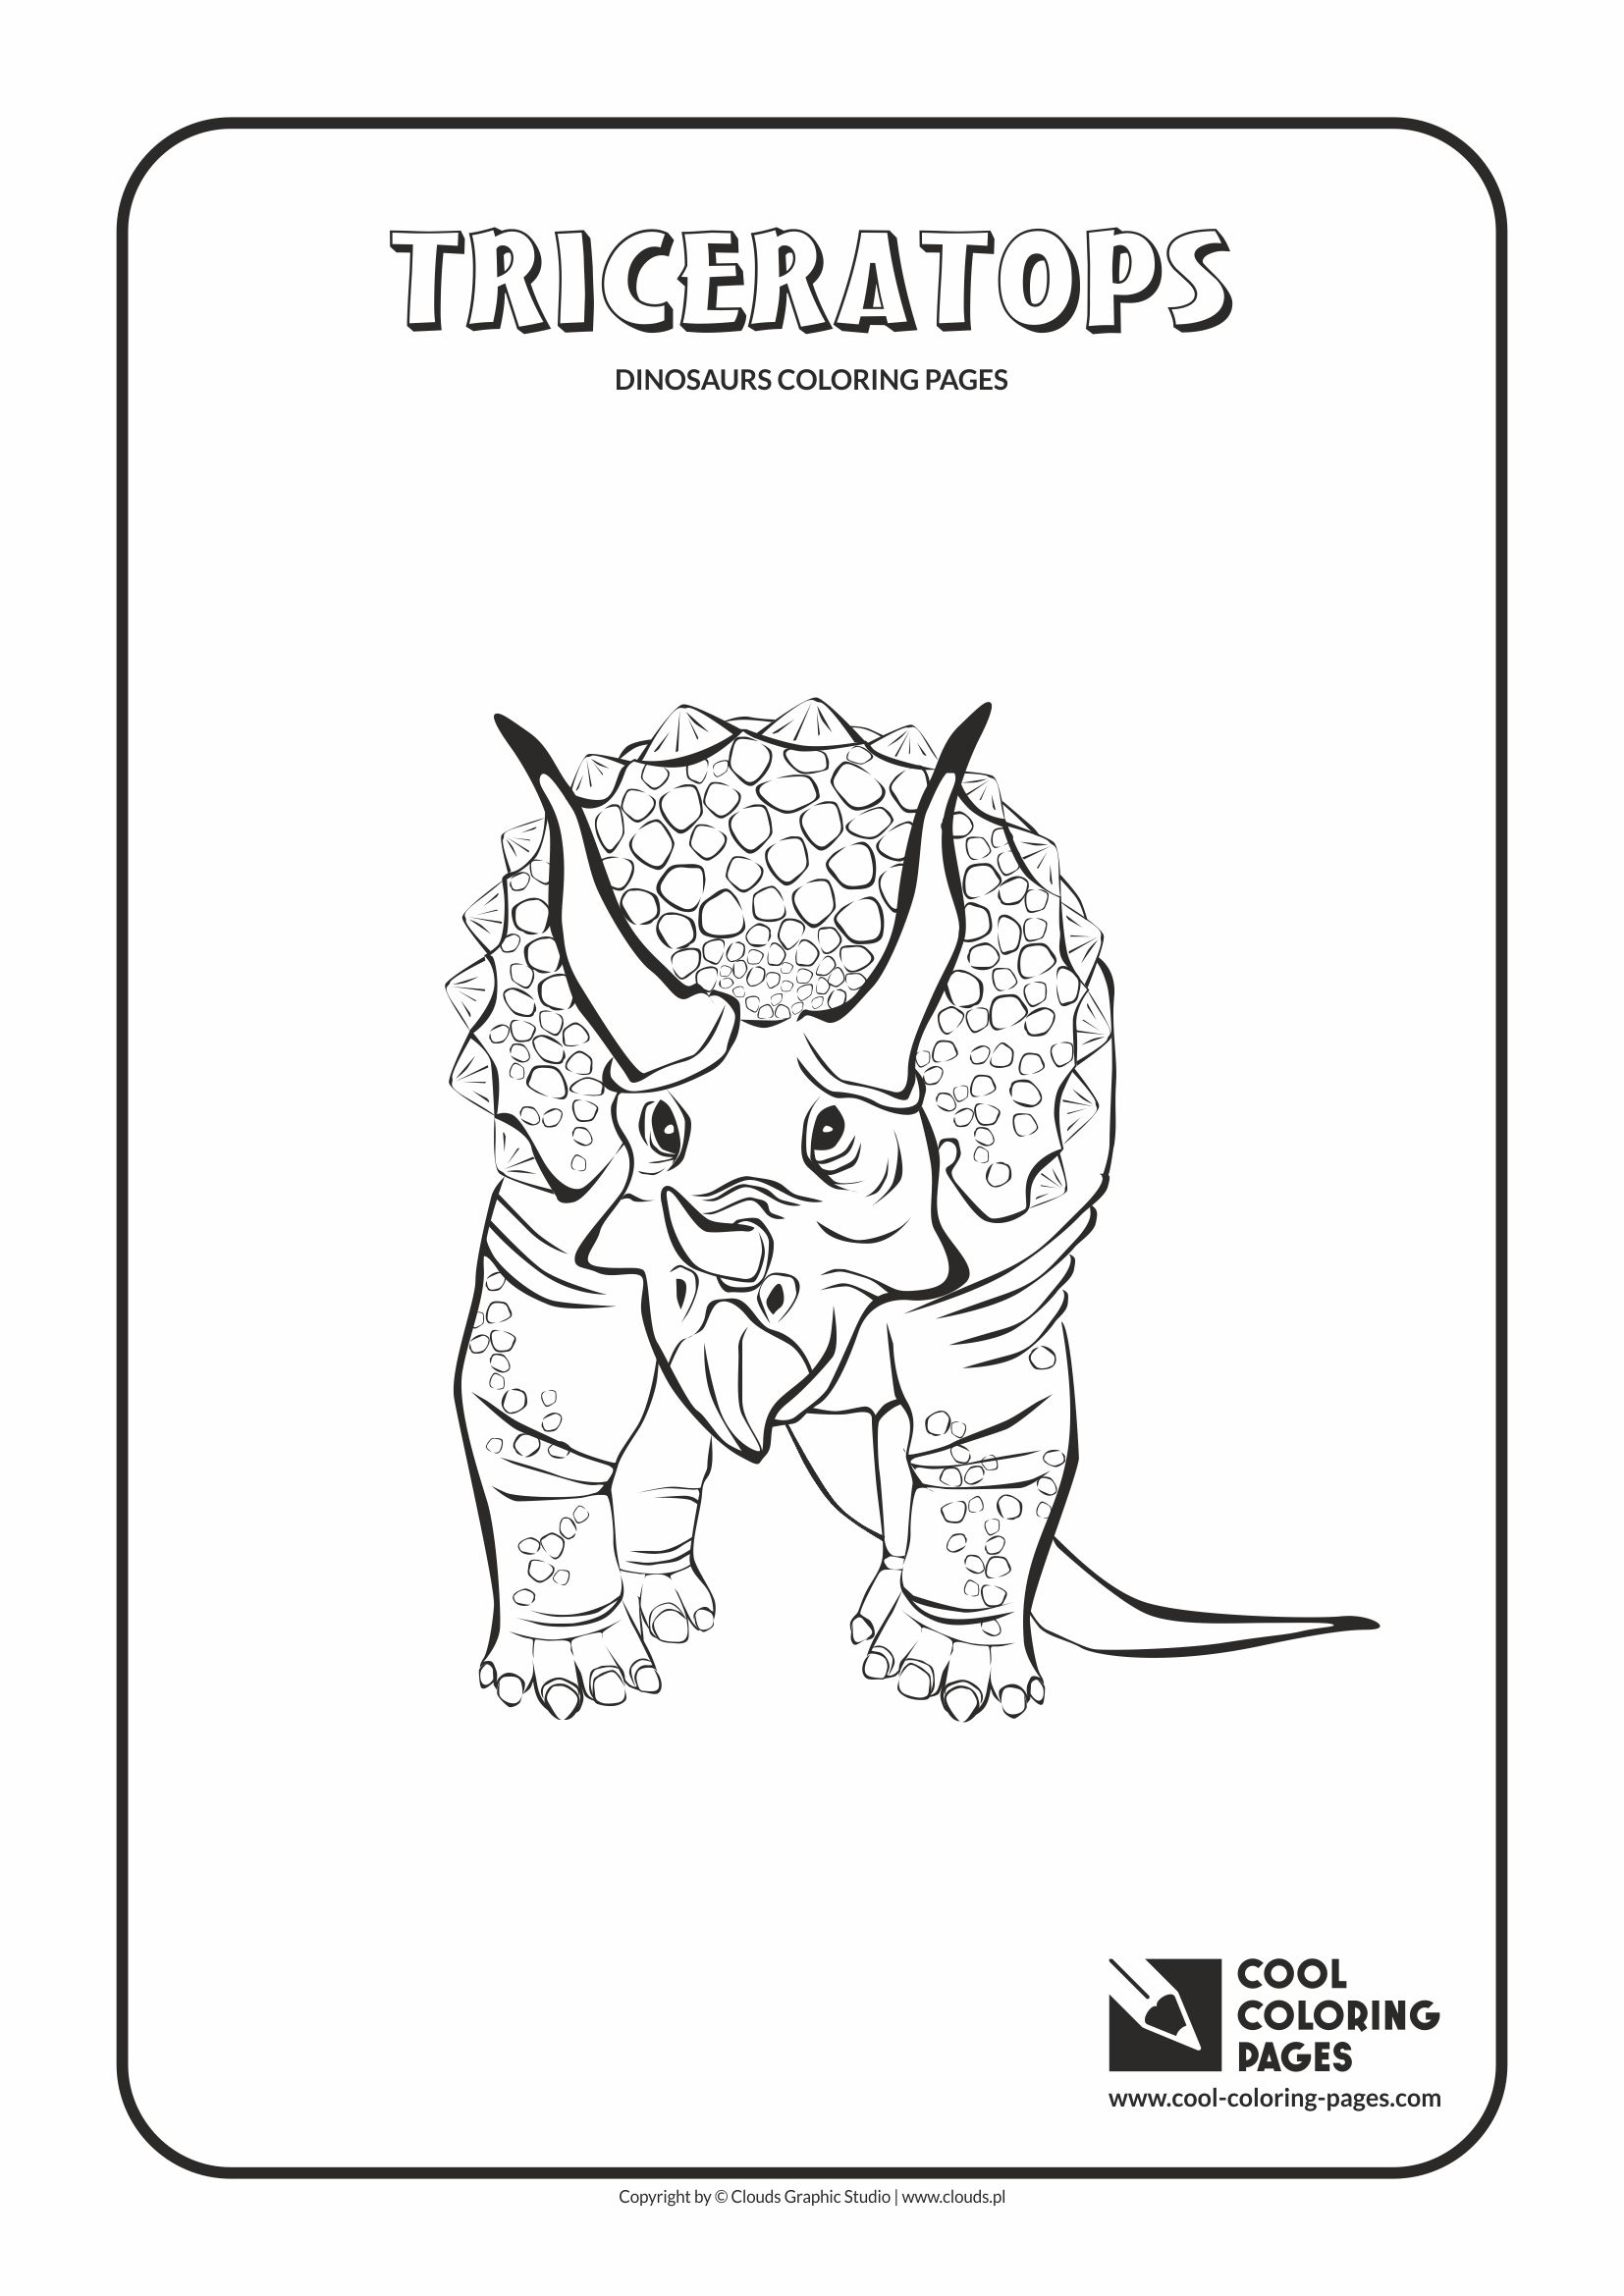 Cool Coloring Pages - Animals / Triceratops / Coloring page with triceratops